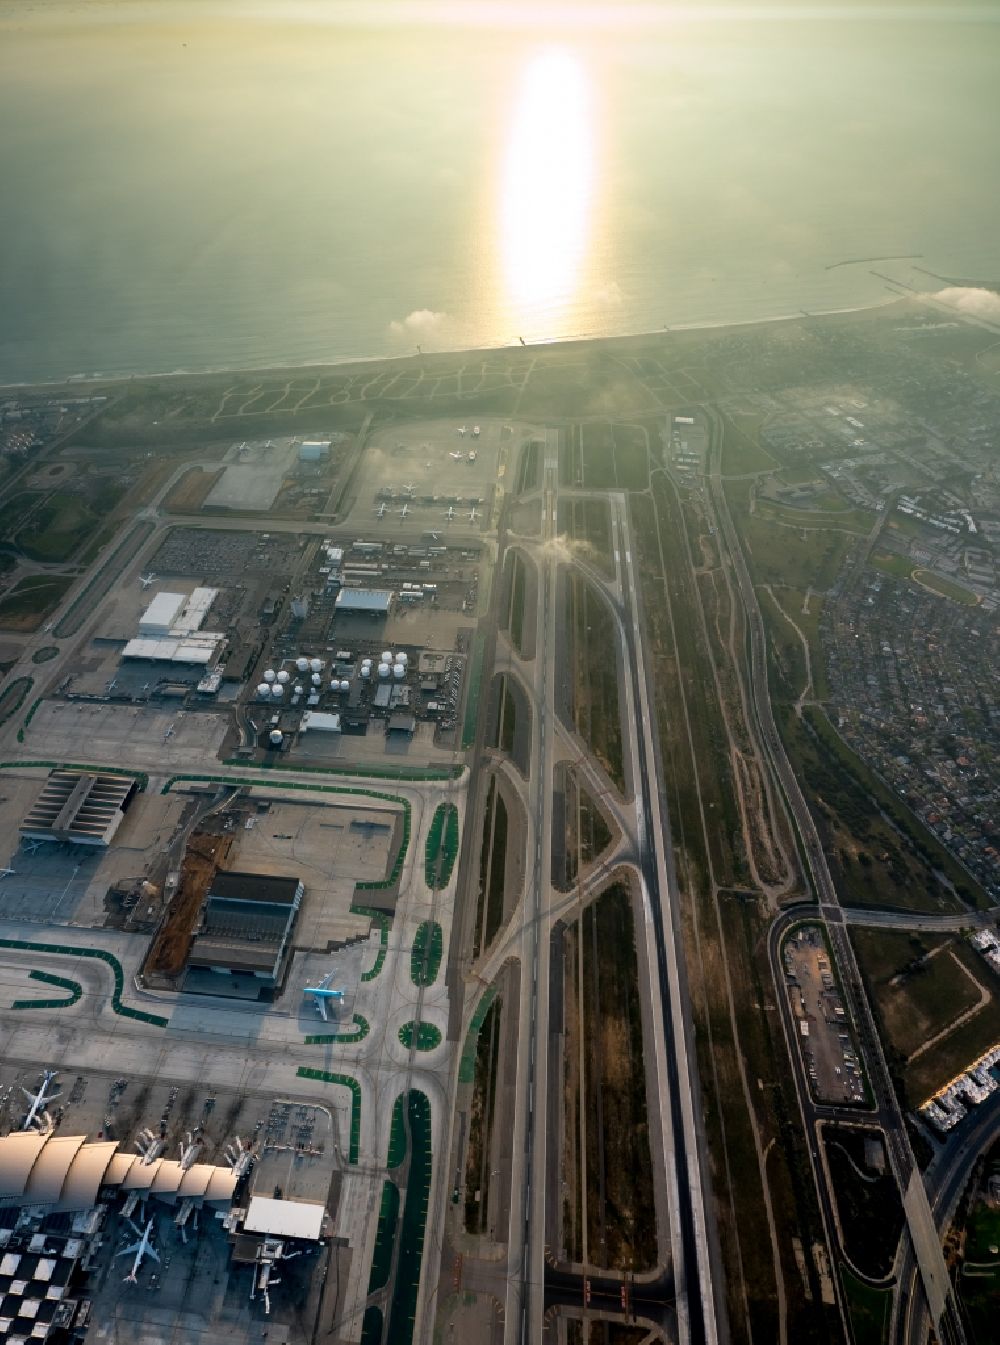 Los Angeles from above - Runway with hangar taxiways and terminals on the grounds of Los Angeles International Airport LAX in sunset in Los Angeles in California, USA